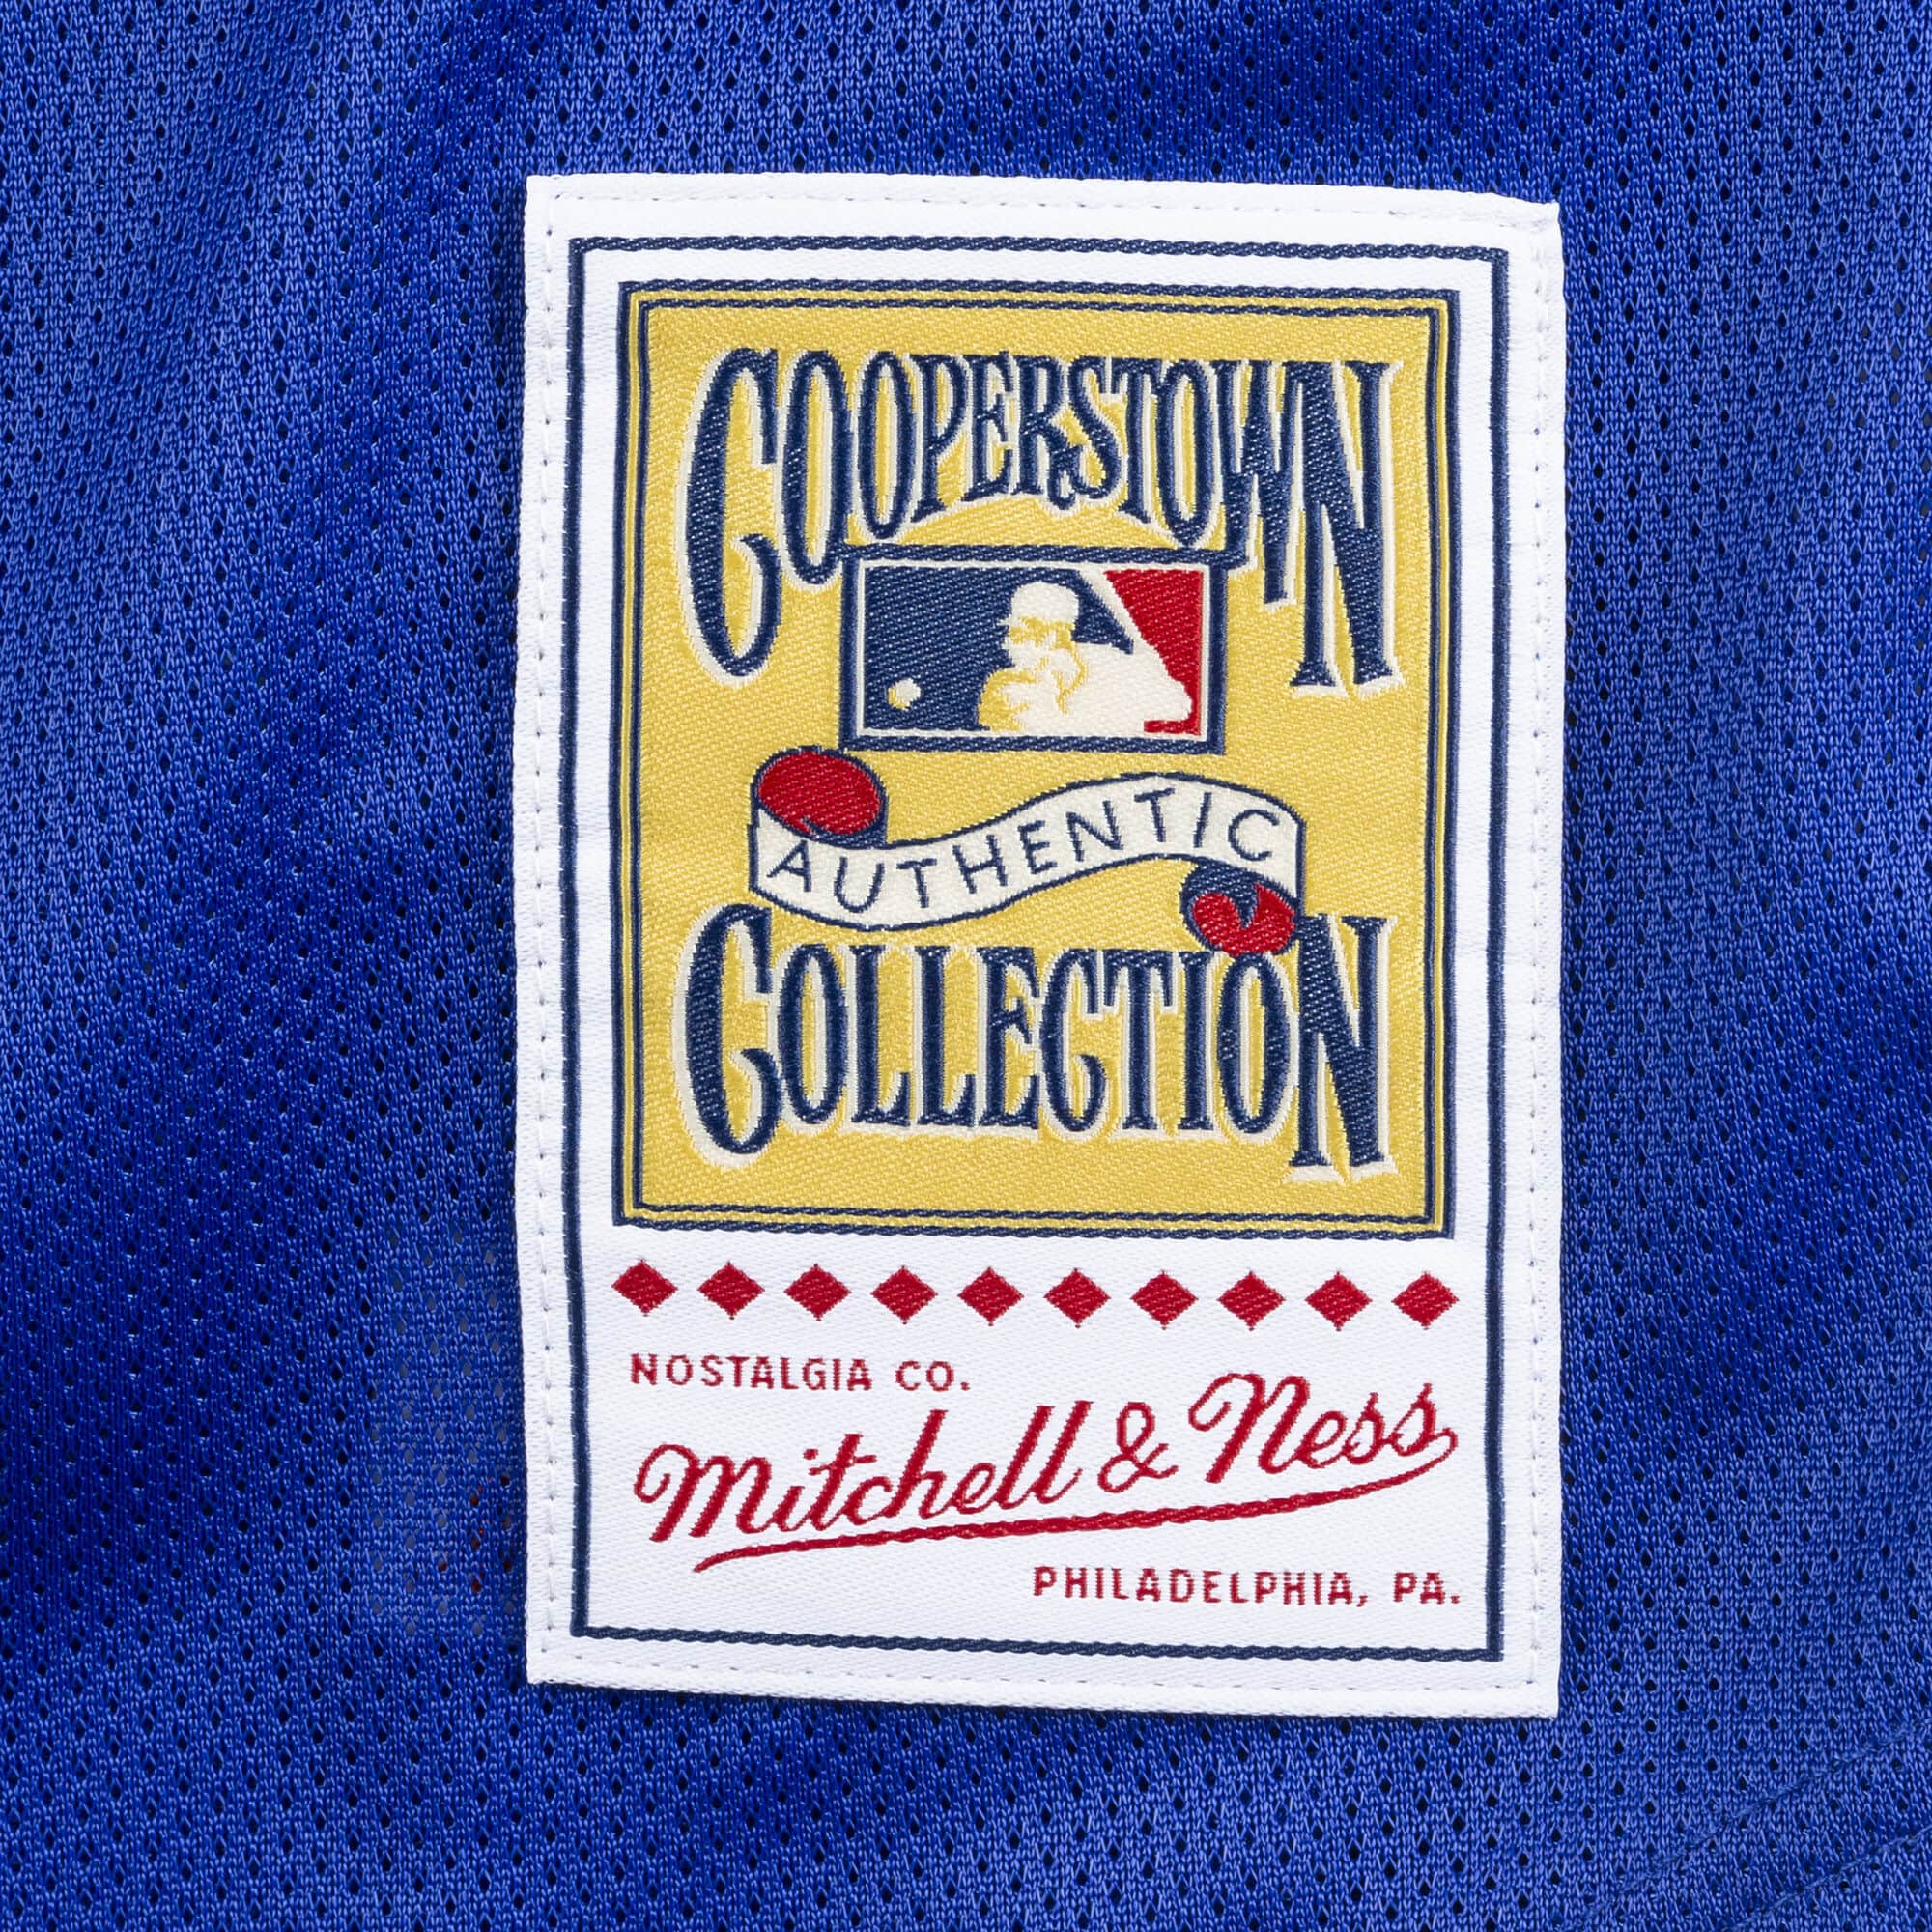  Mitchell and Ness selling Mercury Mets Piazza Jerseys